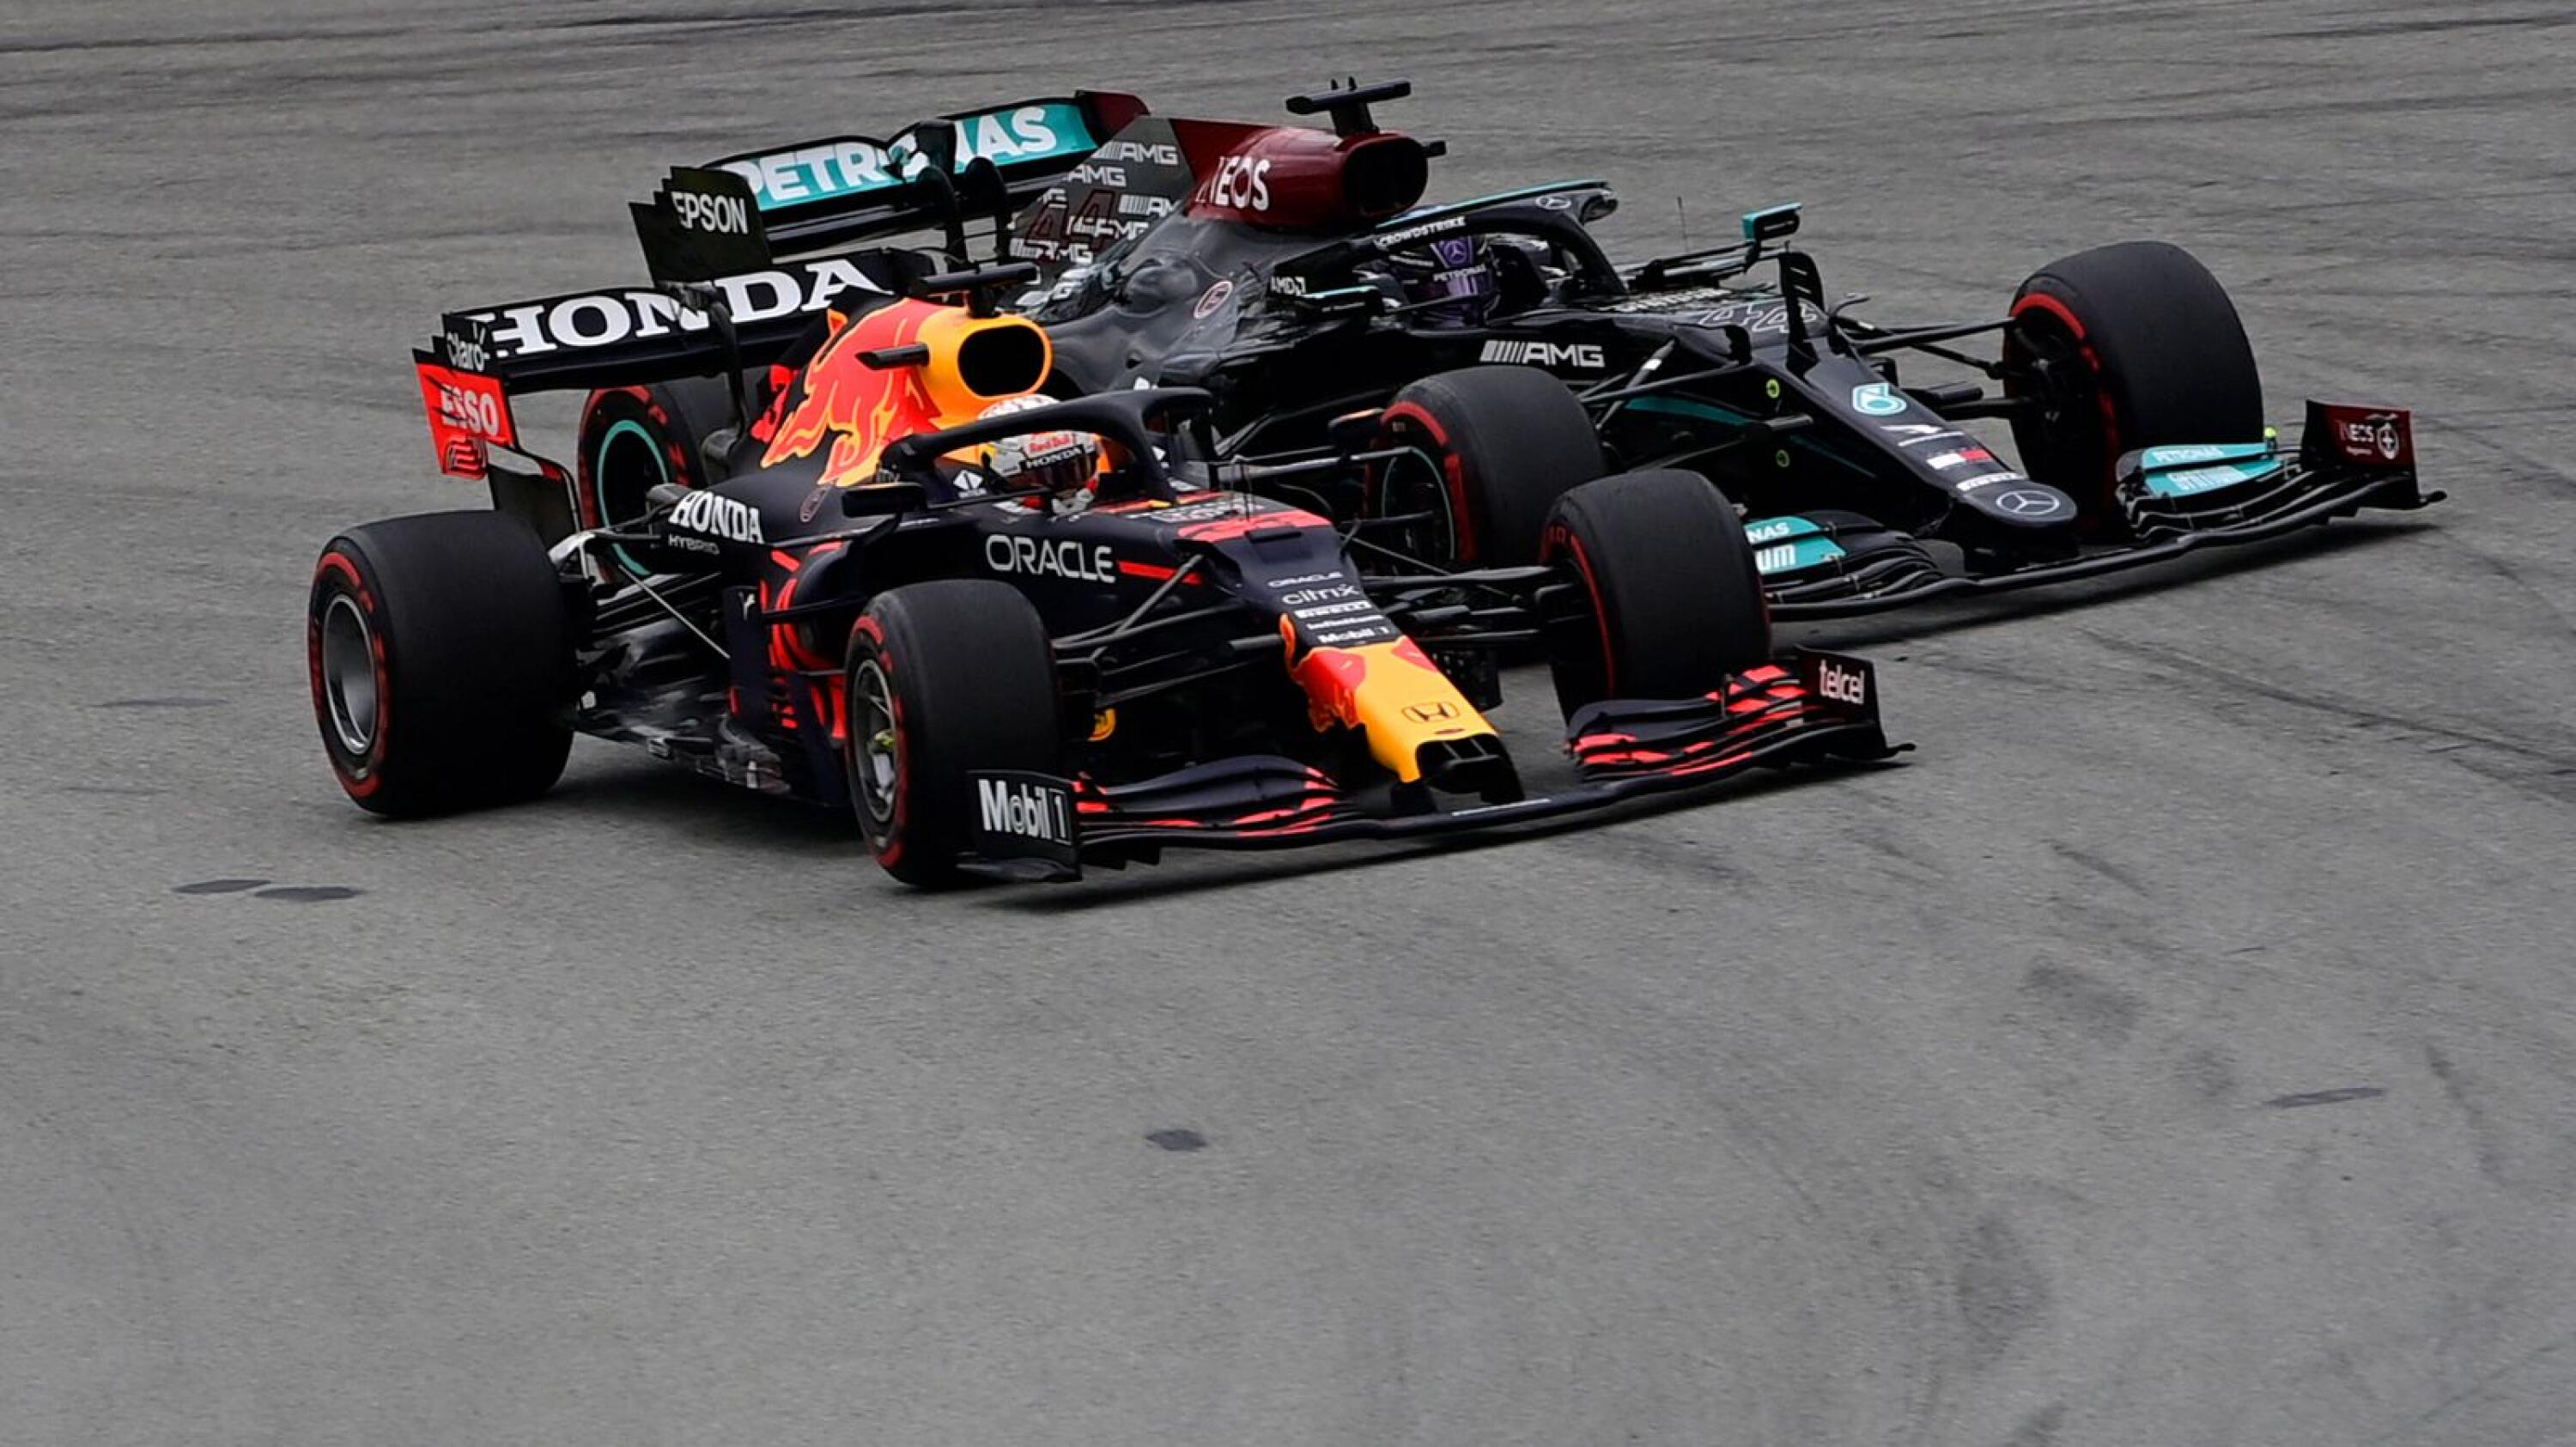 Red Bull's Dutch driver Max Verstappen overtakes Mercedes' British driver Lewis Hamilton at the start of the Spanish Formula One Grand Prix race at the Circuit de Catalunya on May 9, 2021 in Montmelo on the outskirts of Barcelona